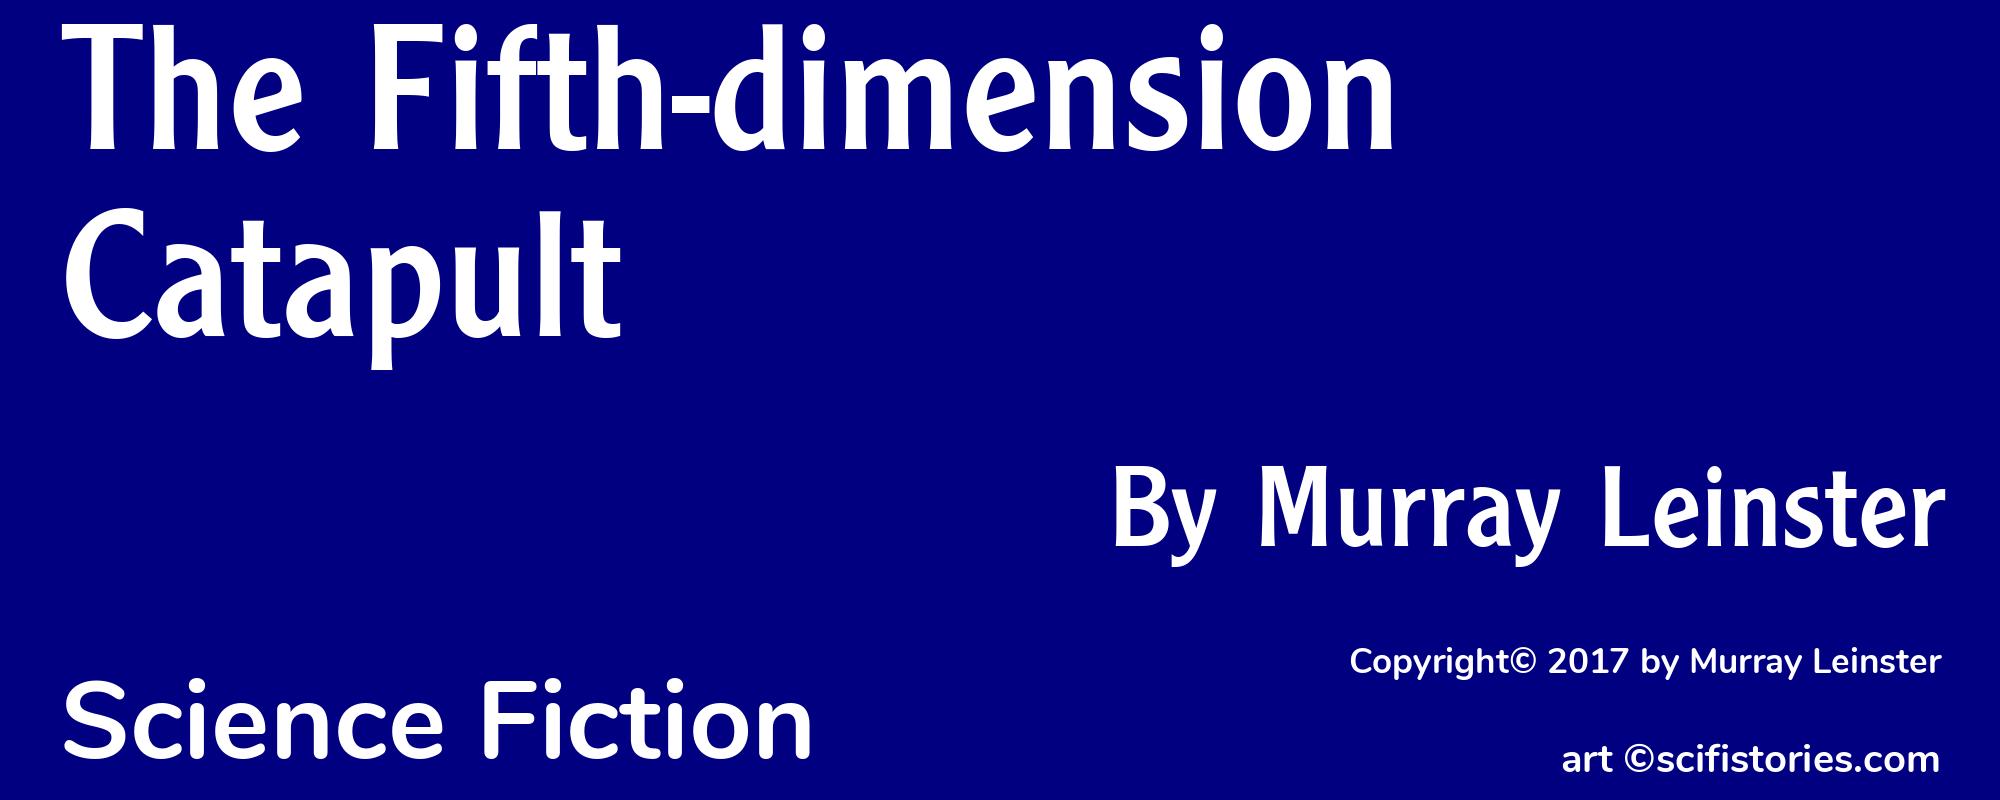 The Fifth-dimension Catapult - Cover